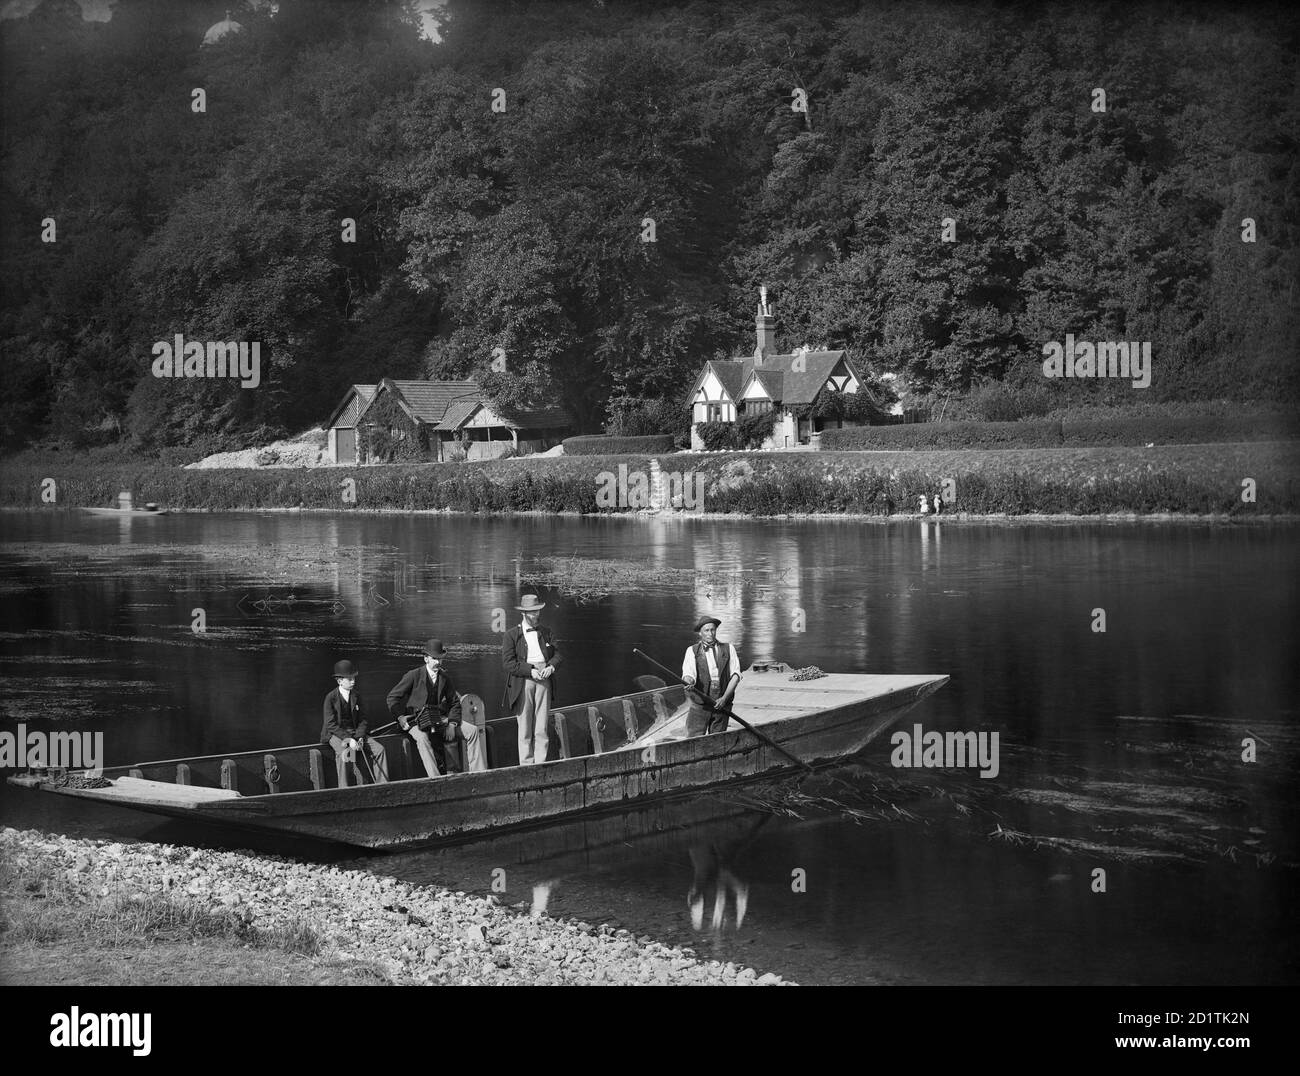 CLIVEDEN FERRY, Cliveden, Taplow, Buckinghamshire. The ferryman is ready to take two men and a boy across the river. The man seated on the side of the boat holds a camera. The River Thames is wide and shallow at this point. Henry Taunt, 1885. Stock Photo